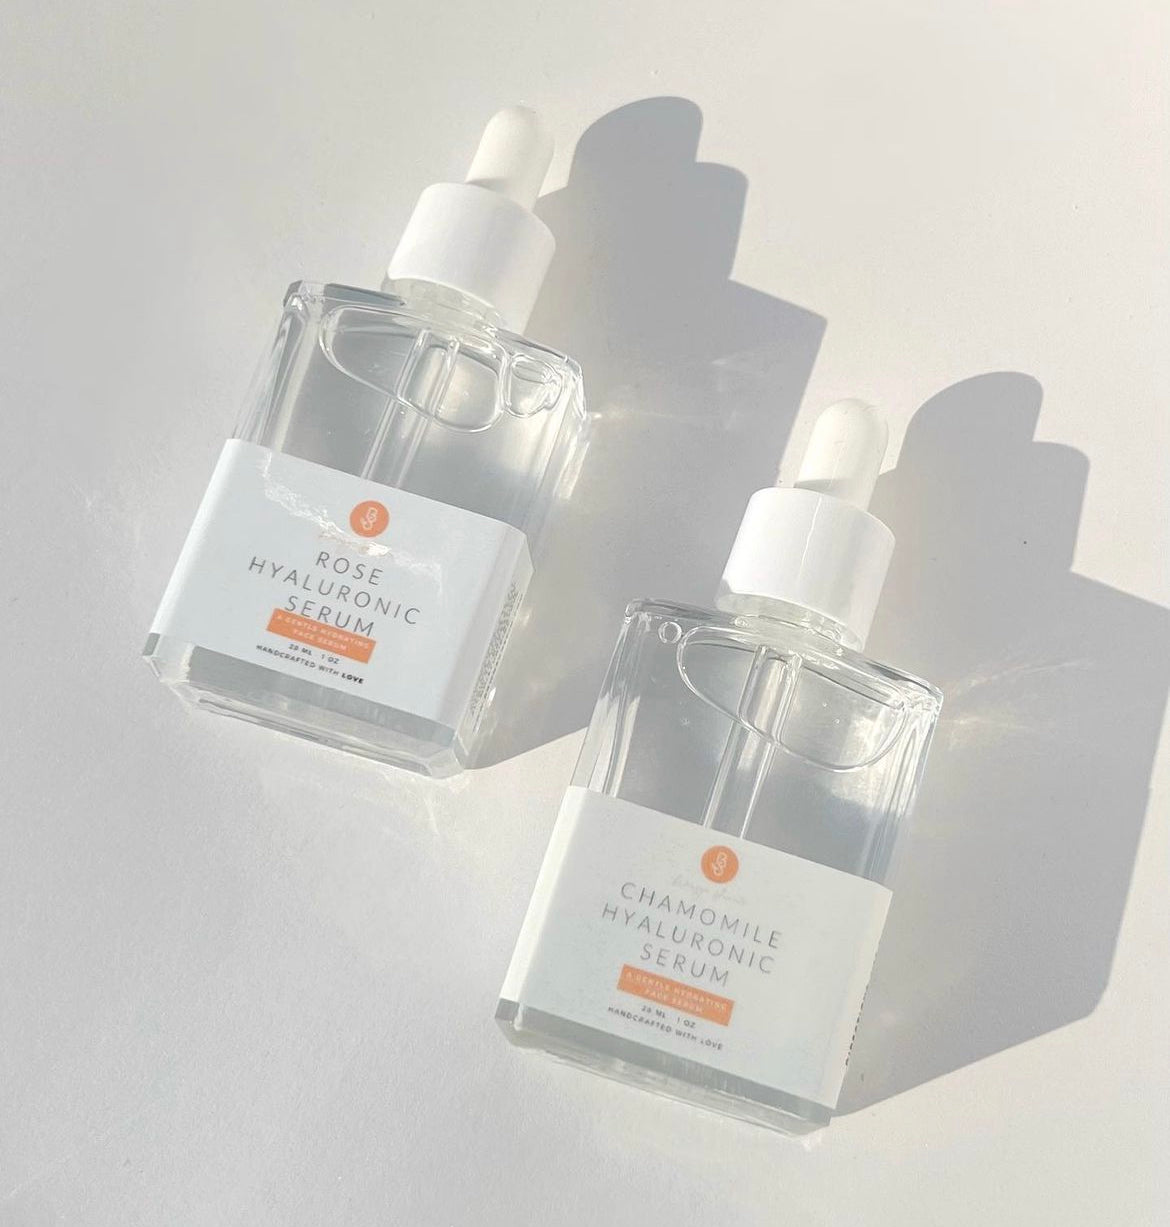 Hyaluronic Serums